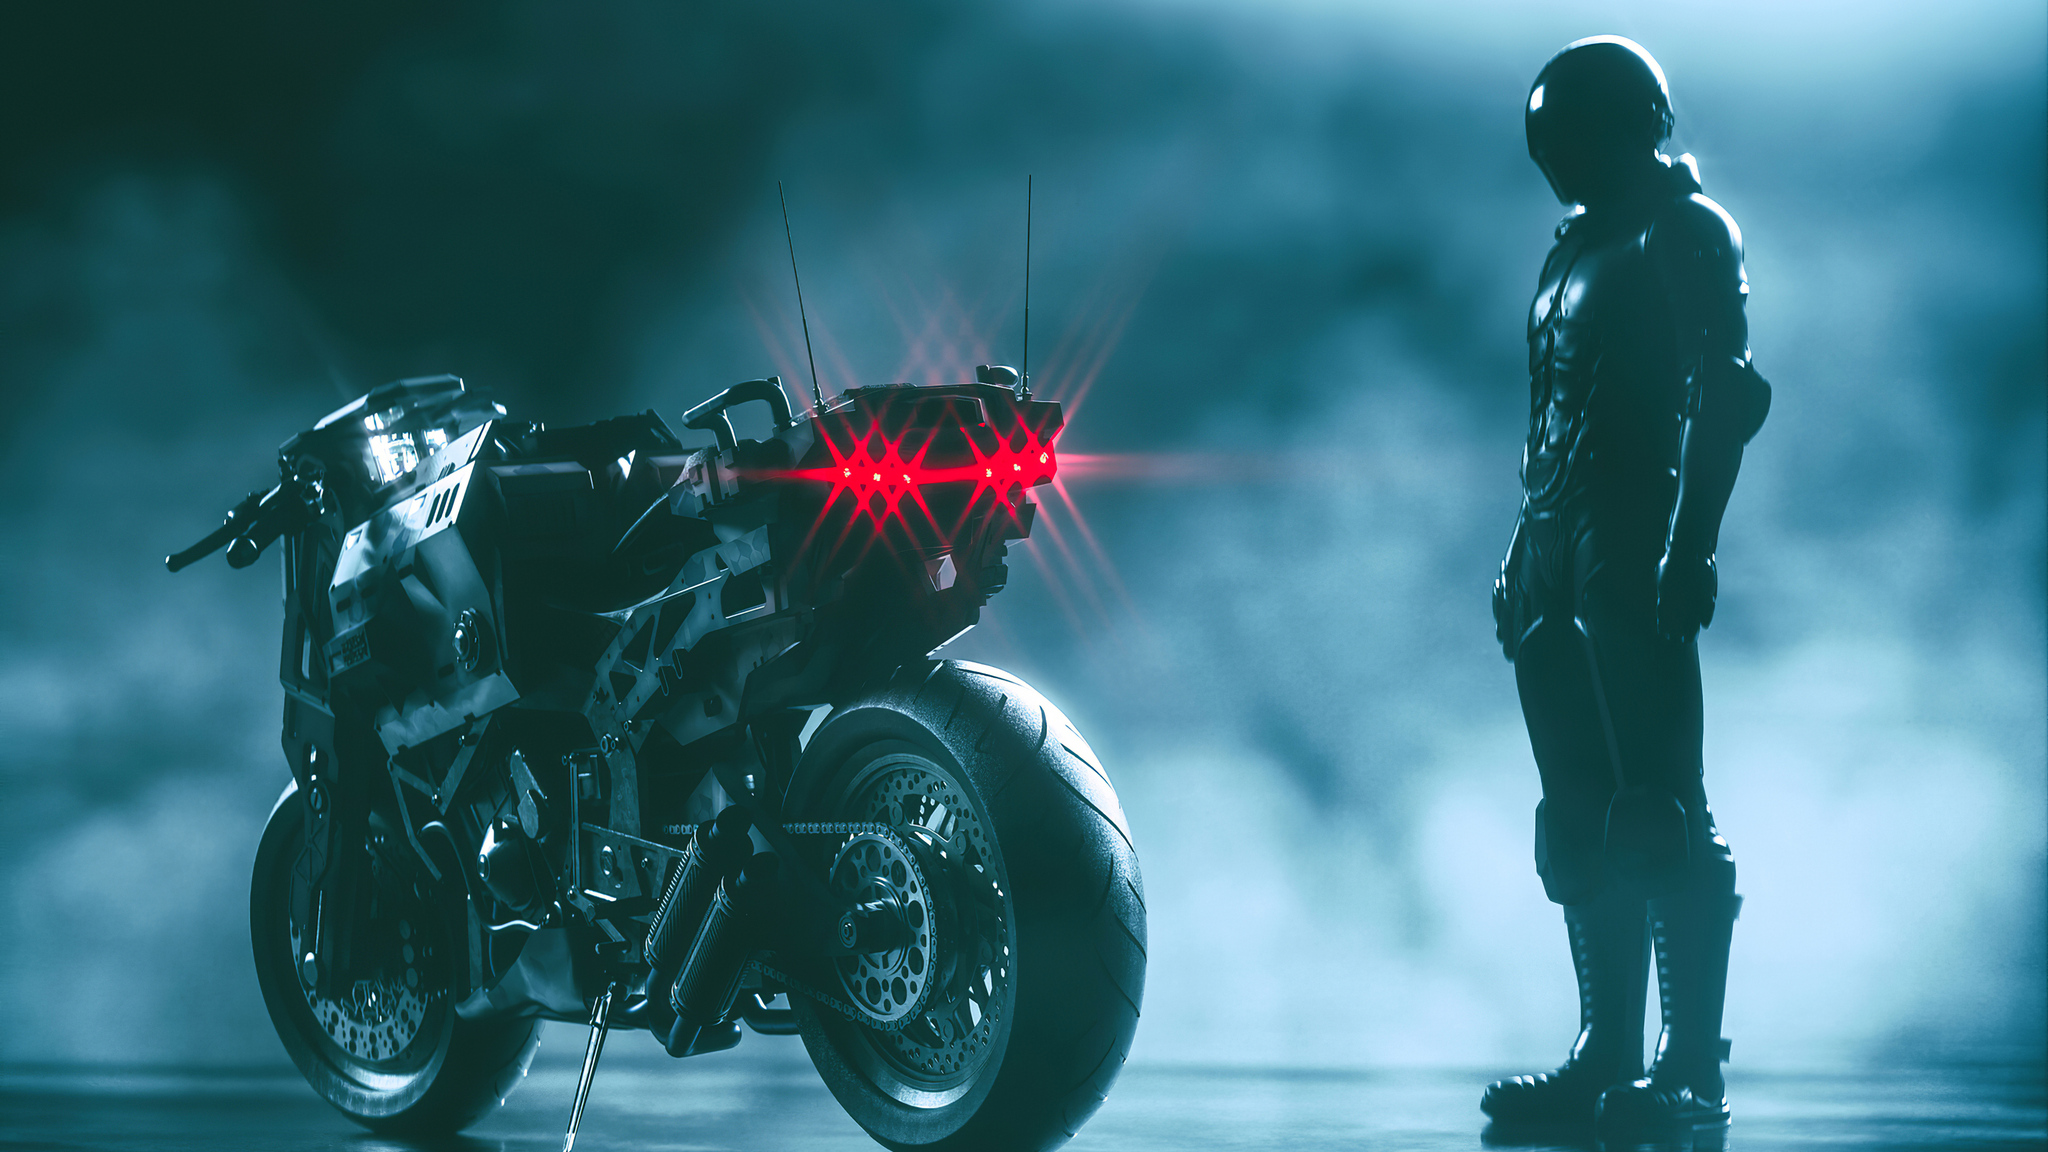 2048x1152 Cyberpunk Bike With Man 4k 2048x1152 Resolution HD 4k Wallpapers,  Images, Backgrounds, Photos and Pictures